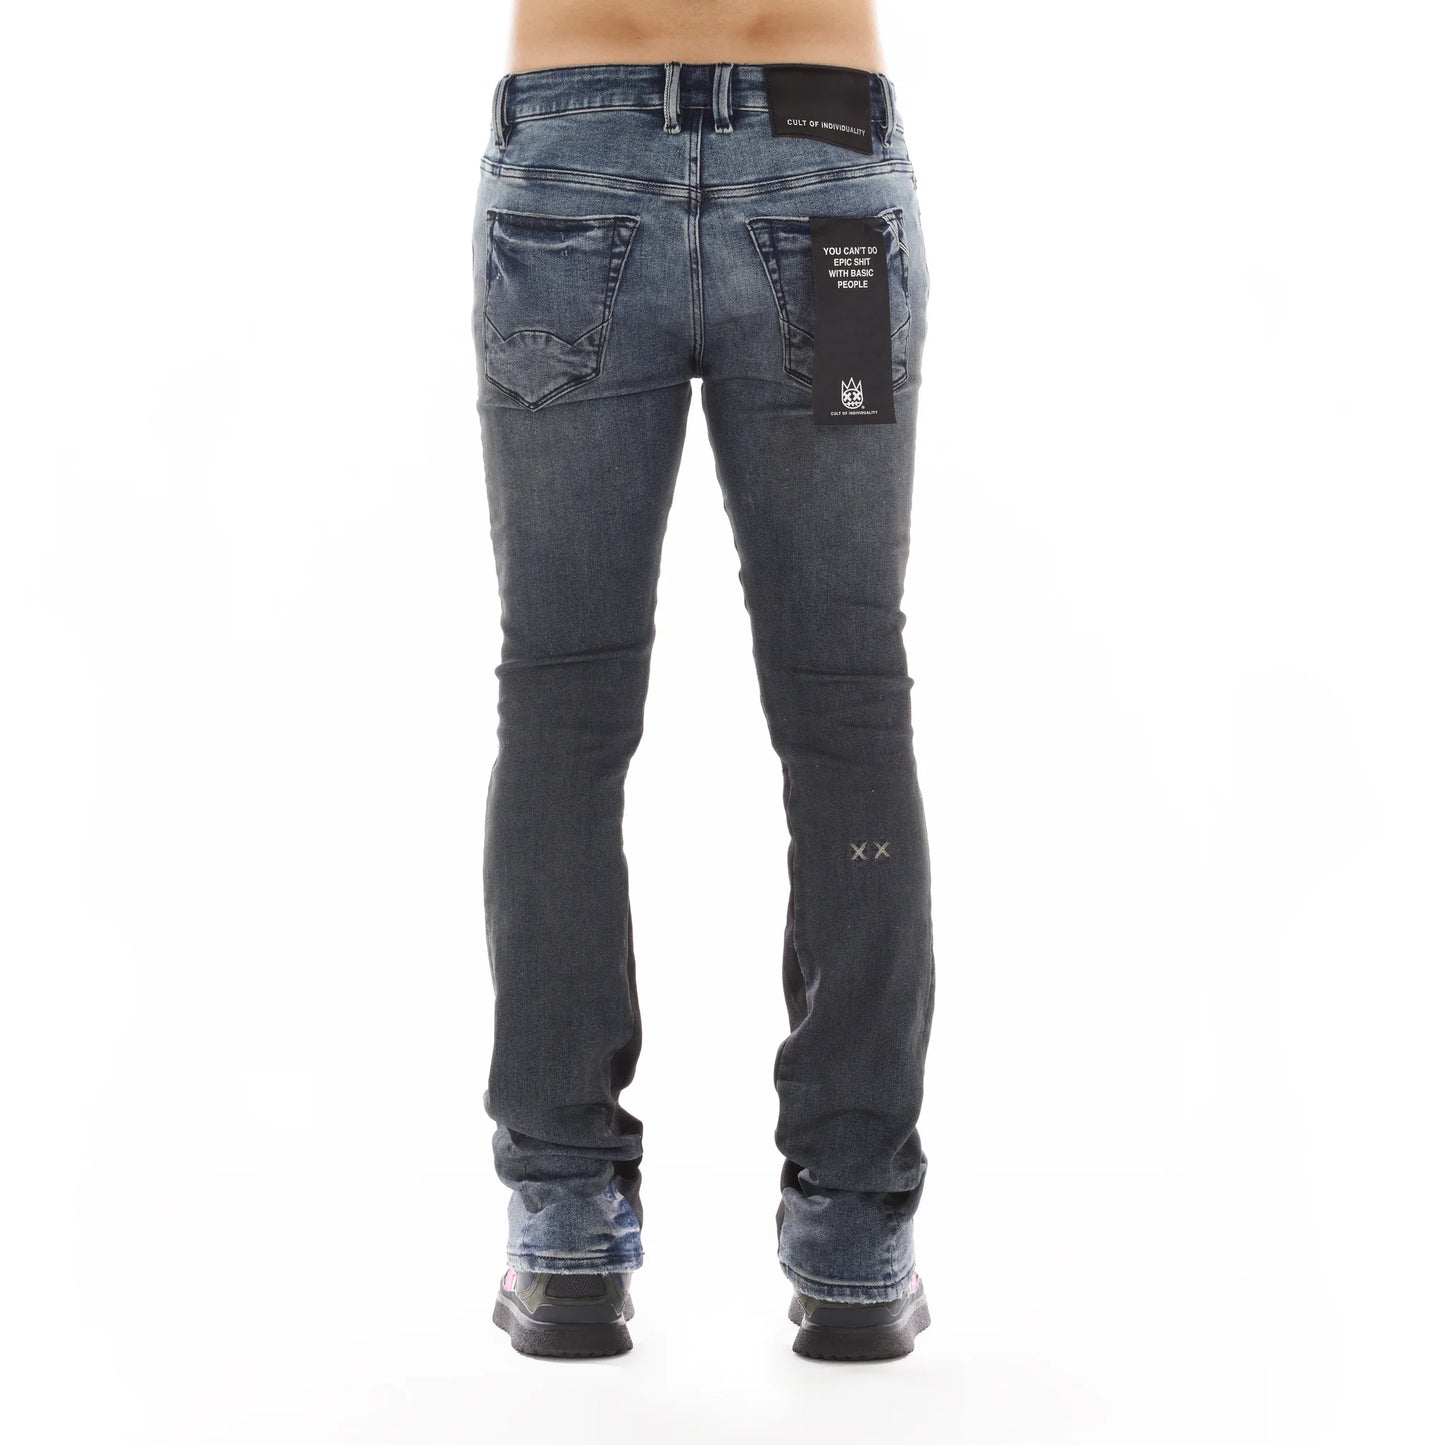 Back view of person wearing Lenny Bootcut in Billie jeans, featuring knee rips and crafted from premium denim composition of 92% Cotton, 4% Polyester, 2% Spandex